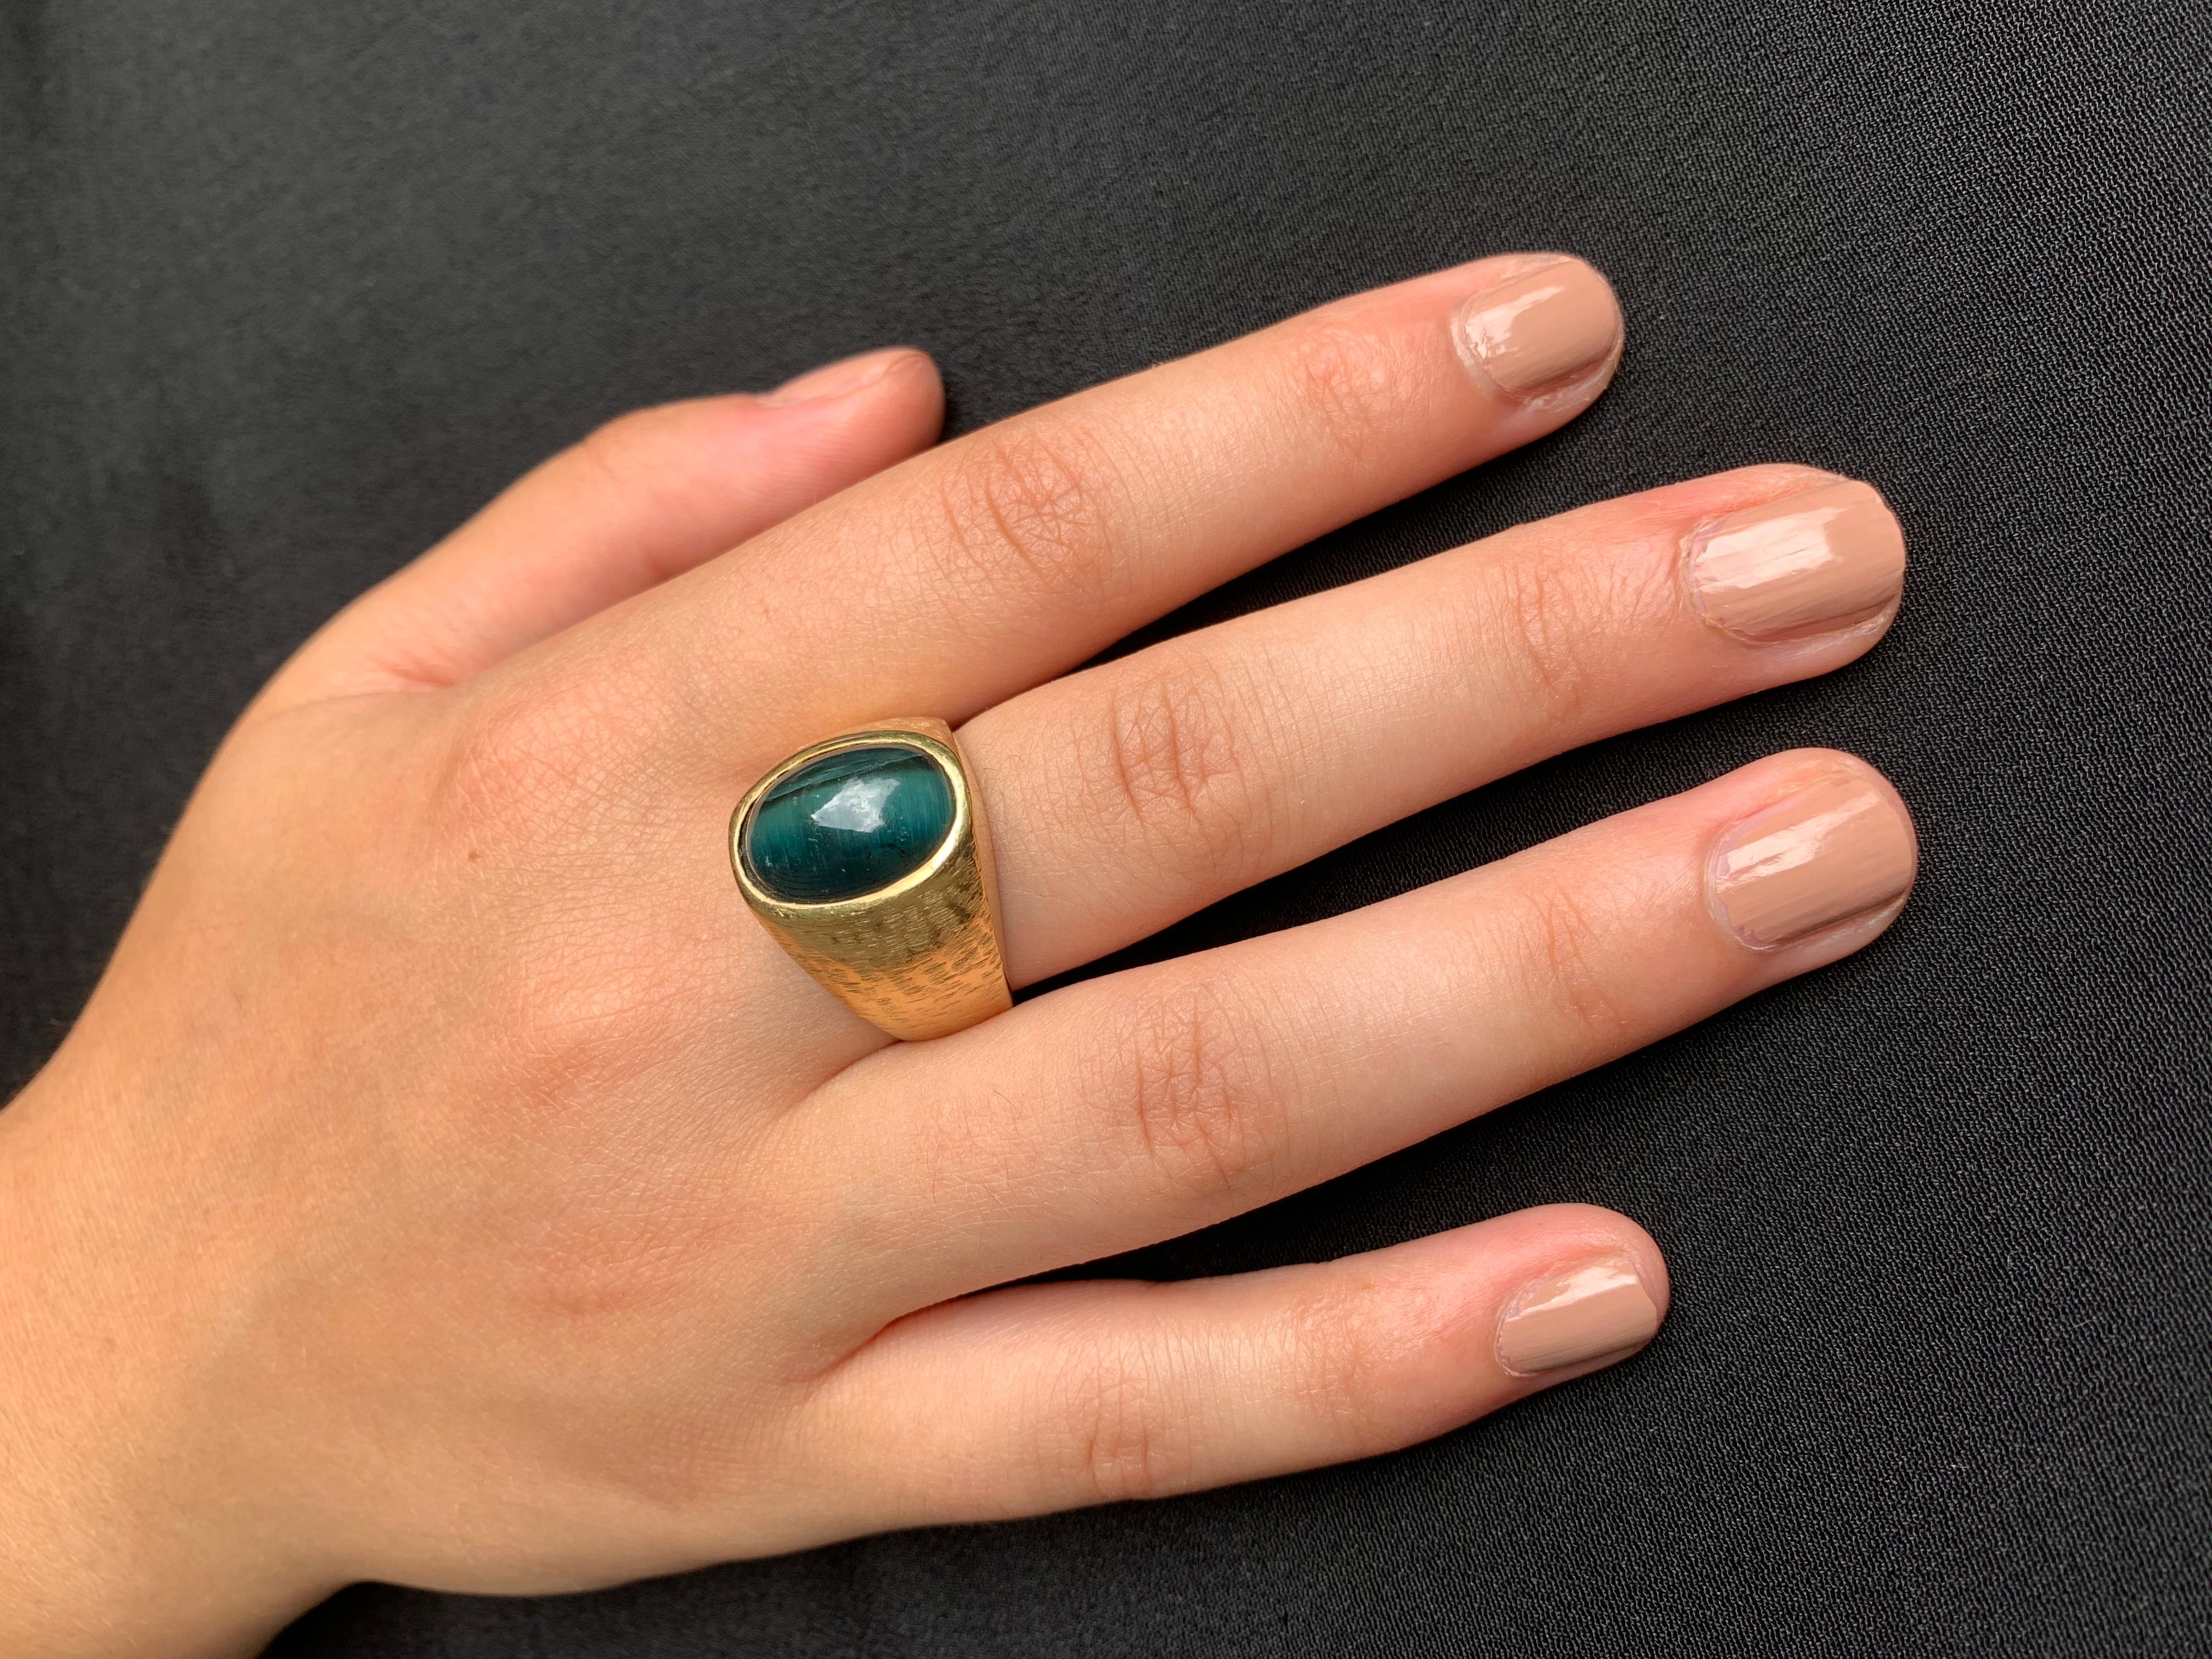 Classic, elegant ring. Substantial cabochon cat's eye tourmaline measuring 15mm by 11mm with a well defined chatoyancy effect, color range green with blueish undertone, set in a textured 18K yellow gold setting, marked 750 on the interior of band